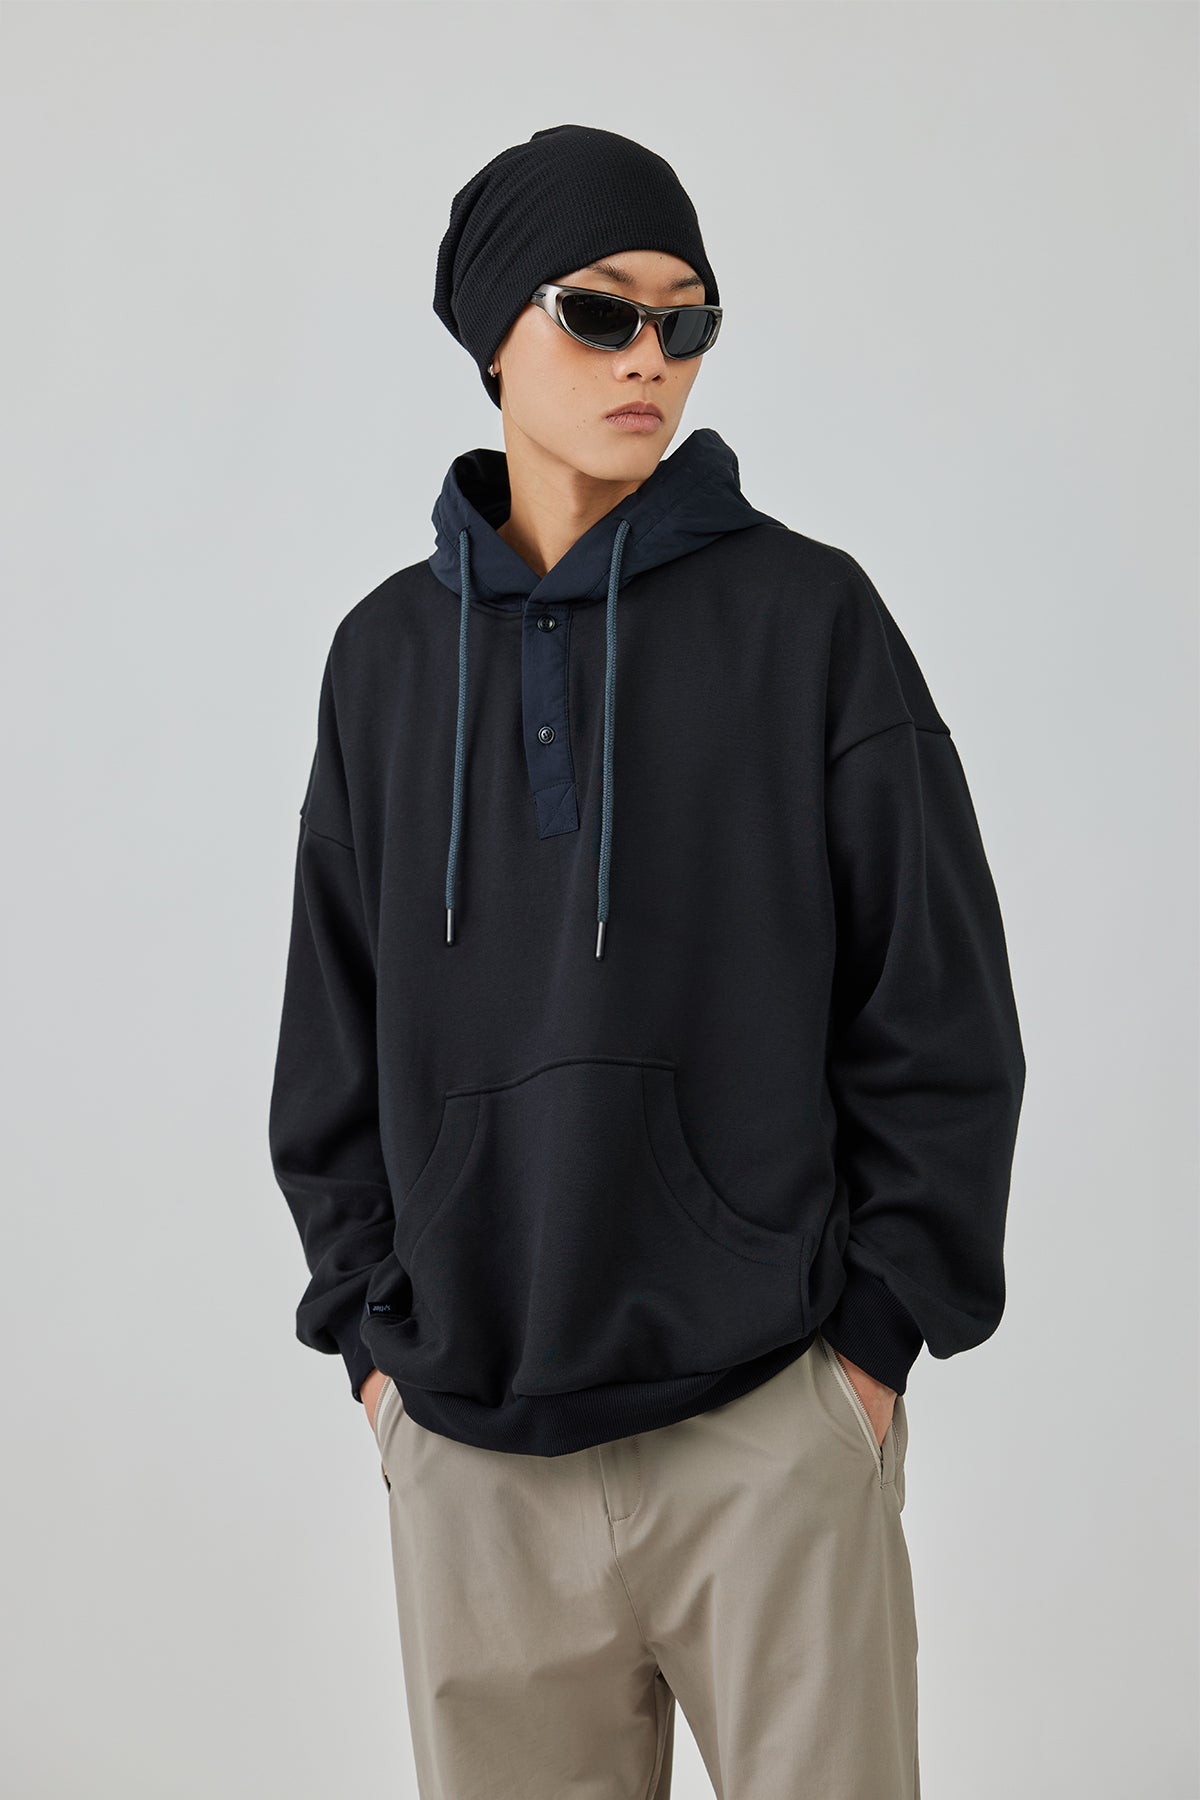 Black Button Up Hoodie